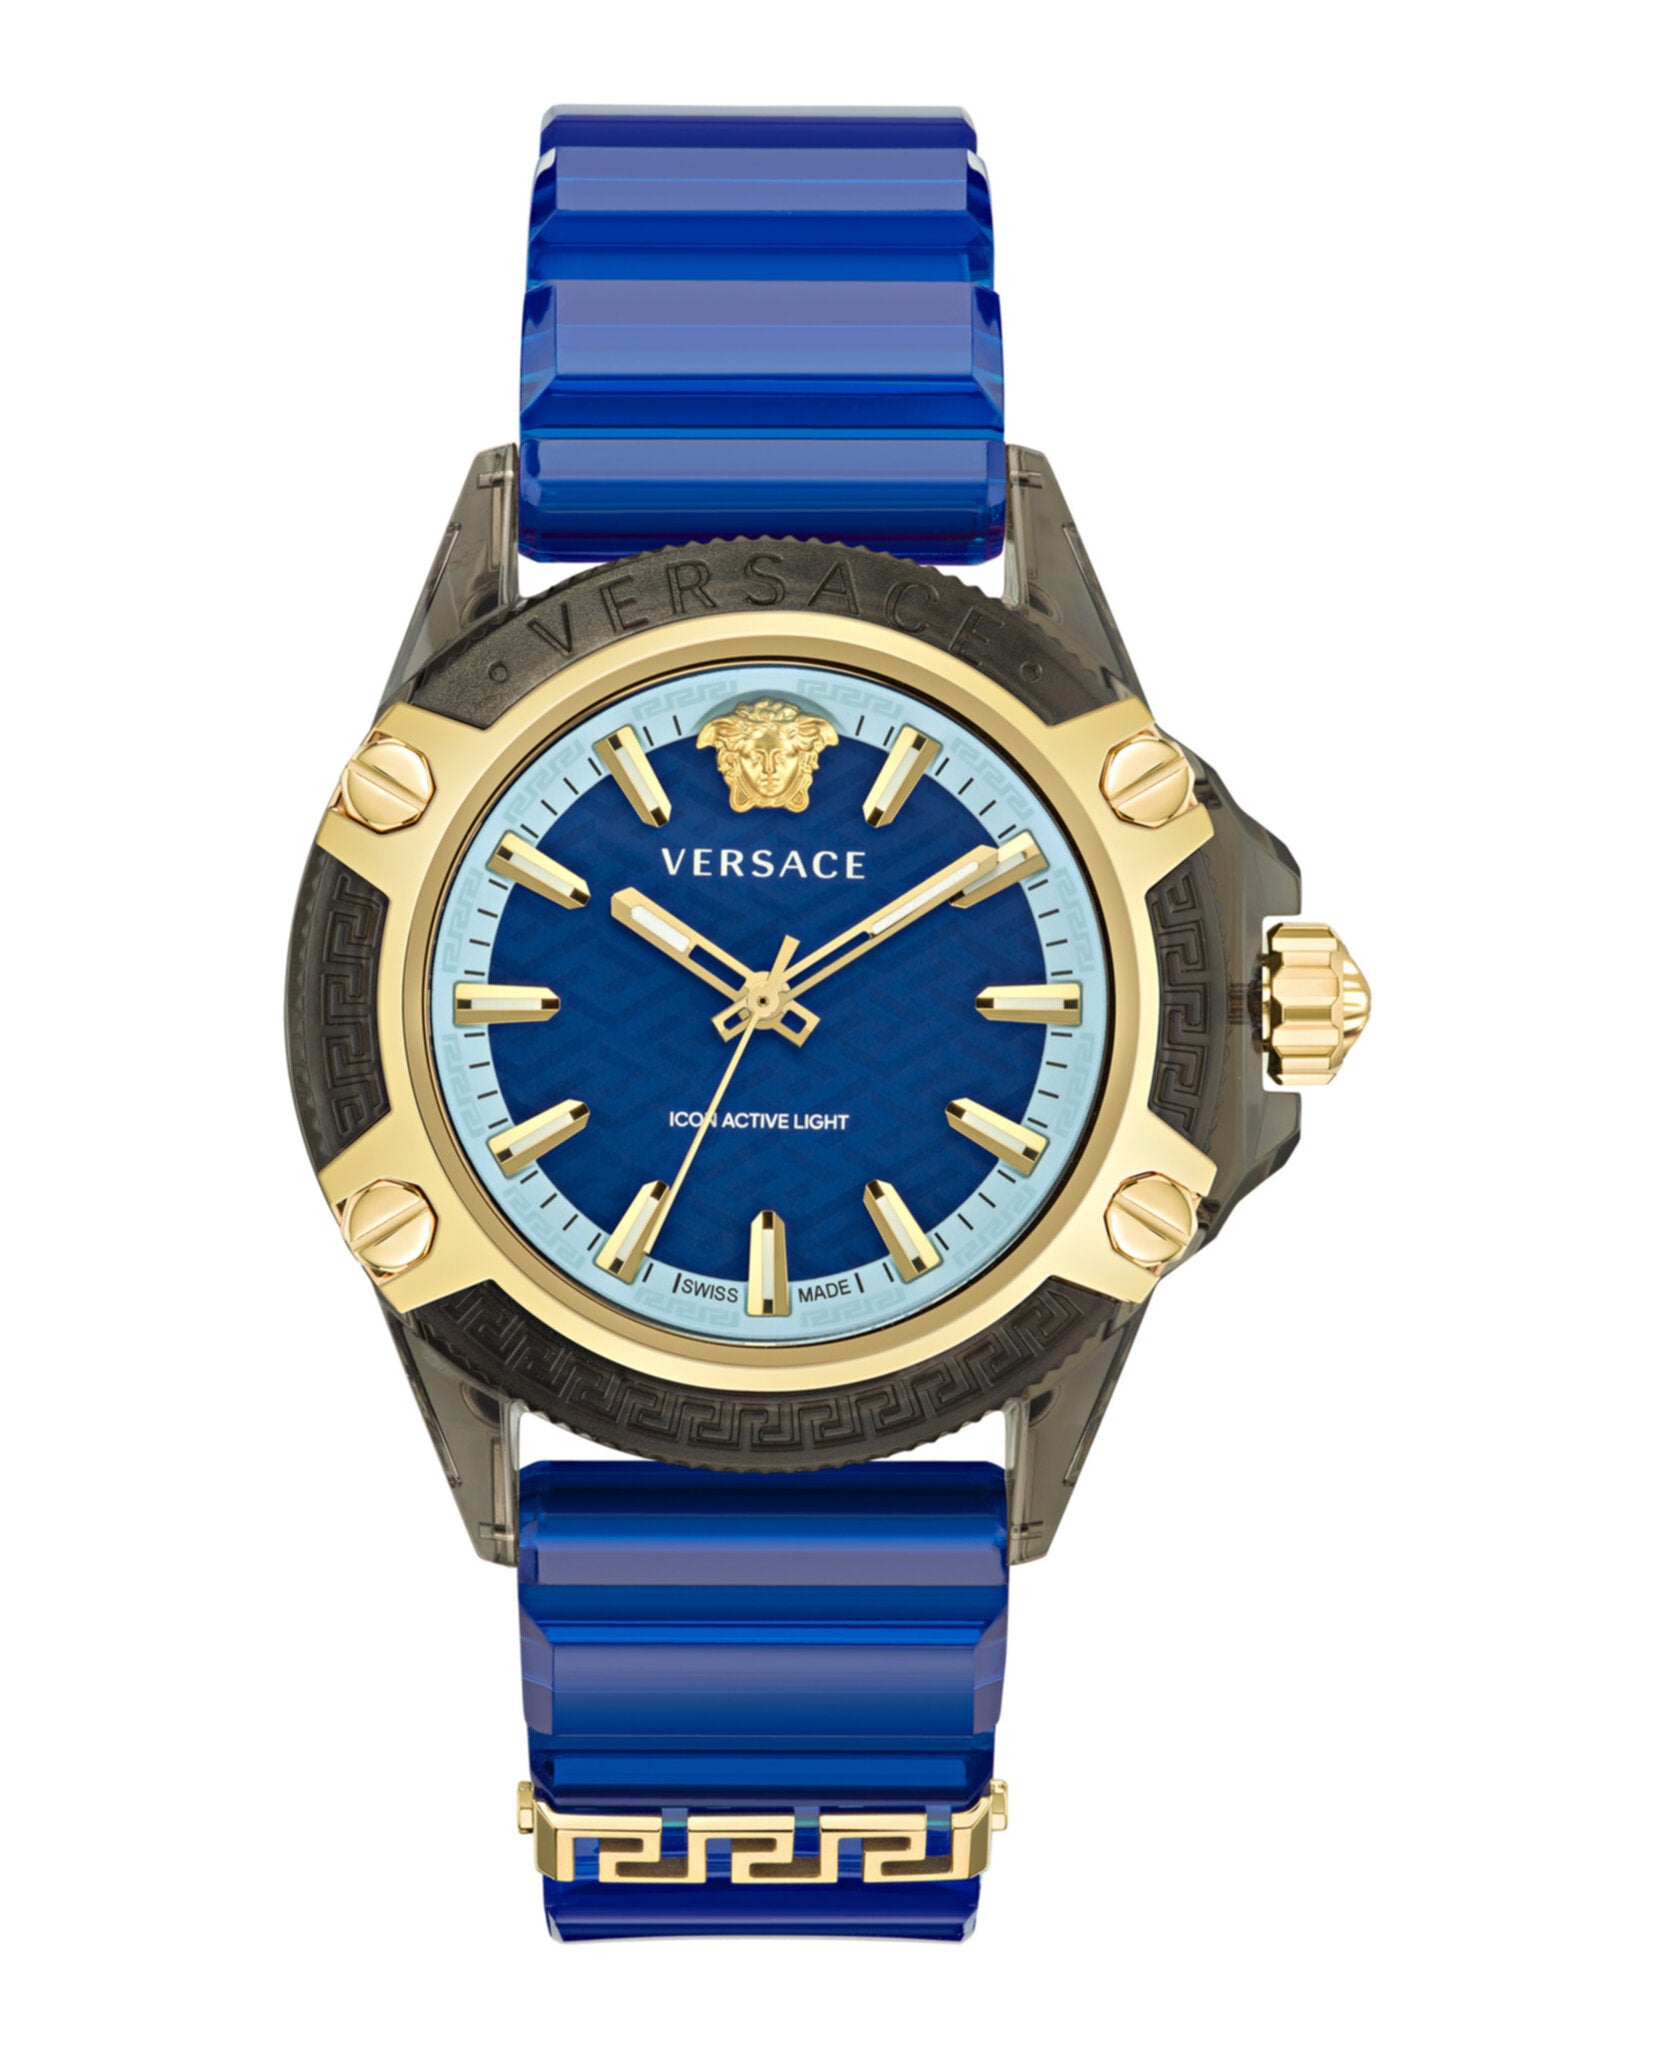 Versace Mens Icon Active Watches MadaLuxe Time Time – | Madaluxe